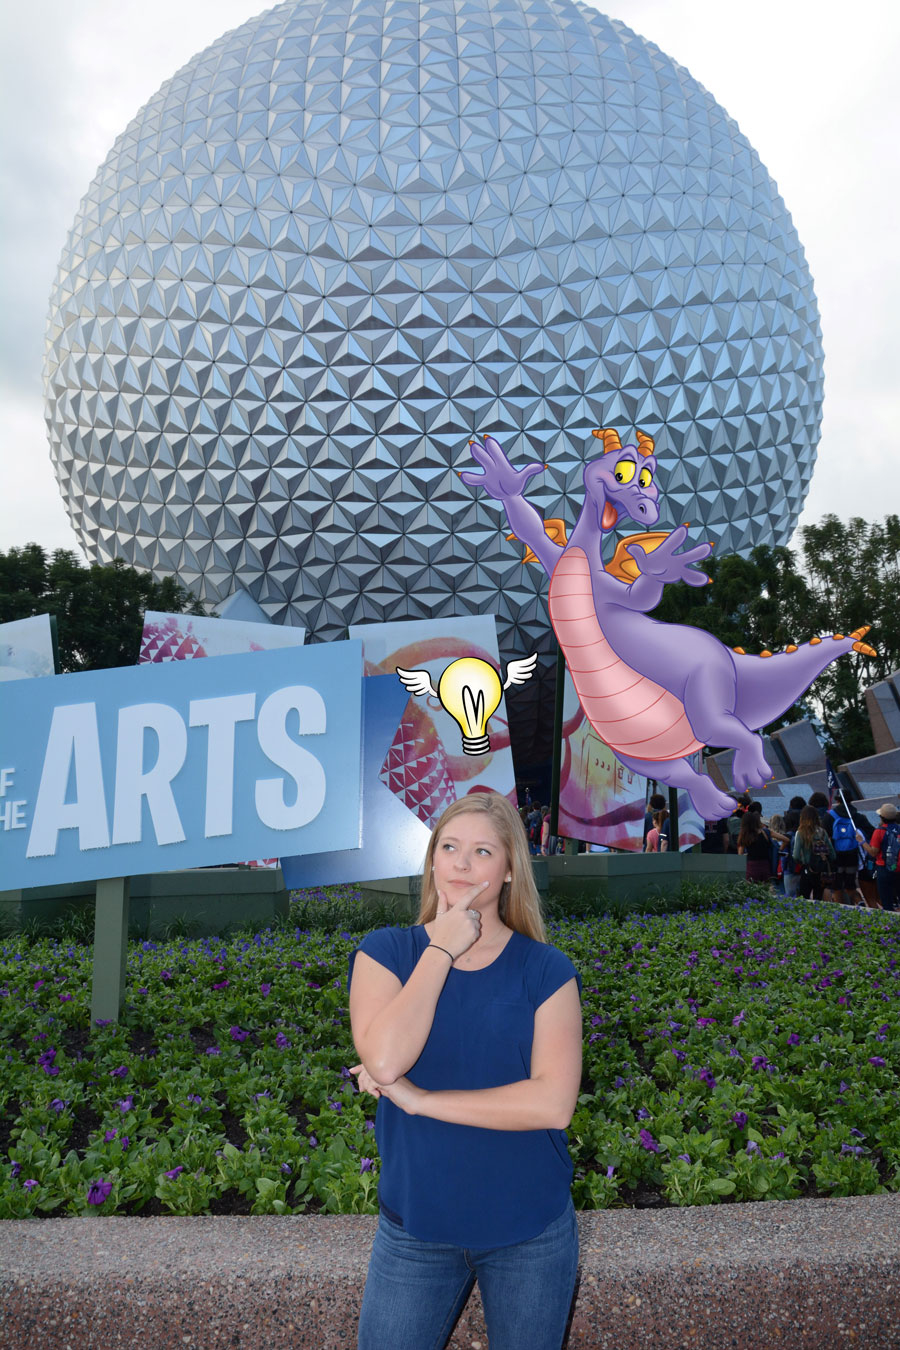 Enjoy a palette of special photo opportunities during the Epcot International Festival of the Arts